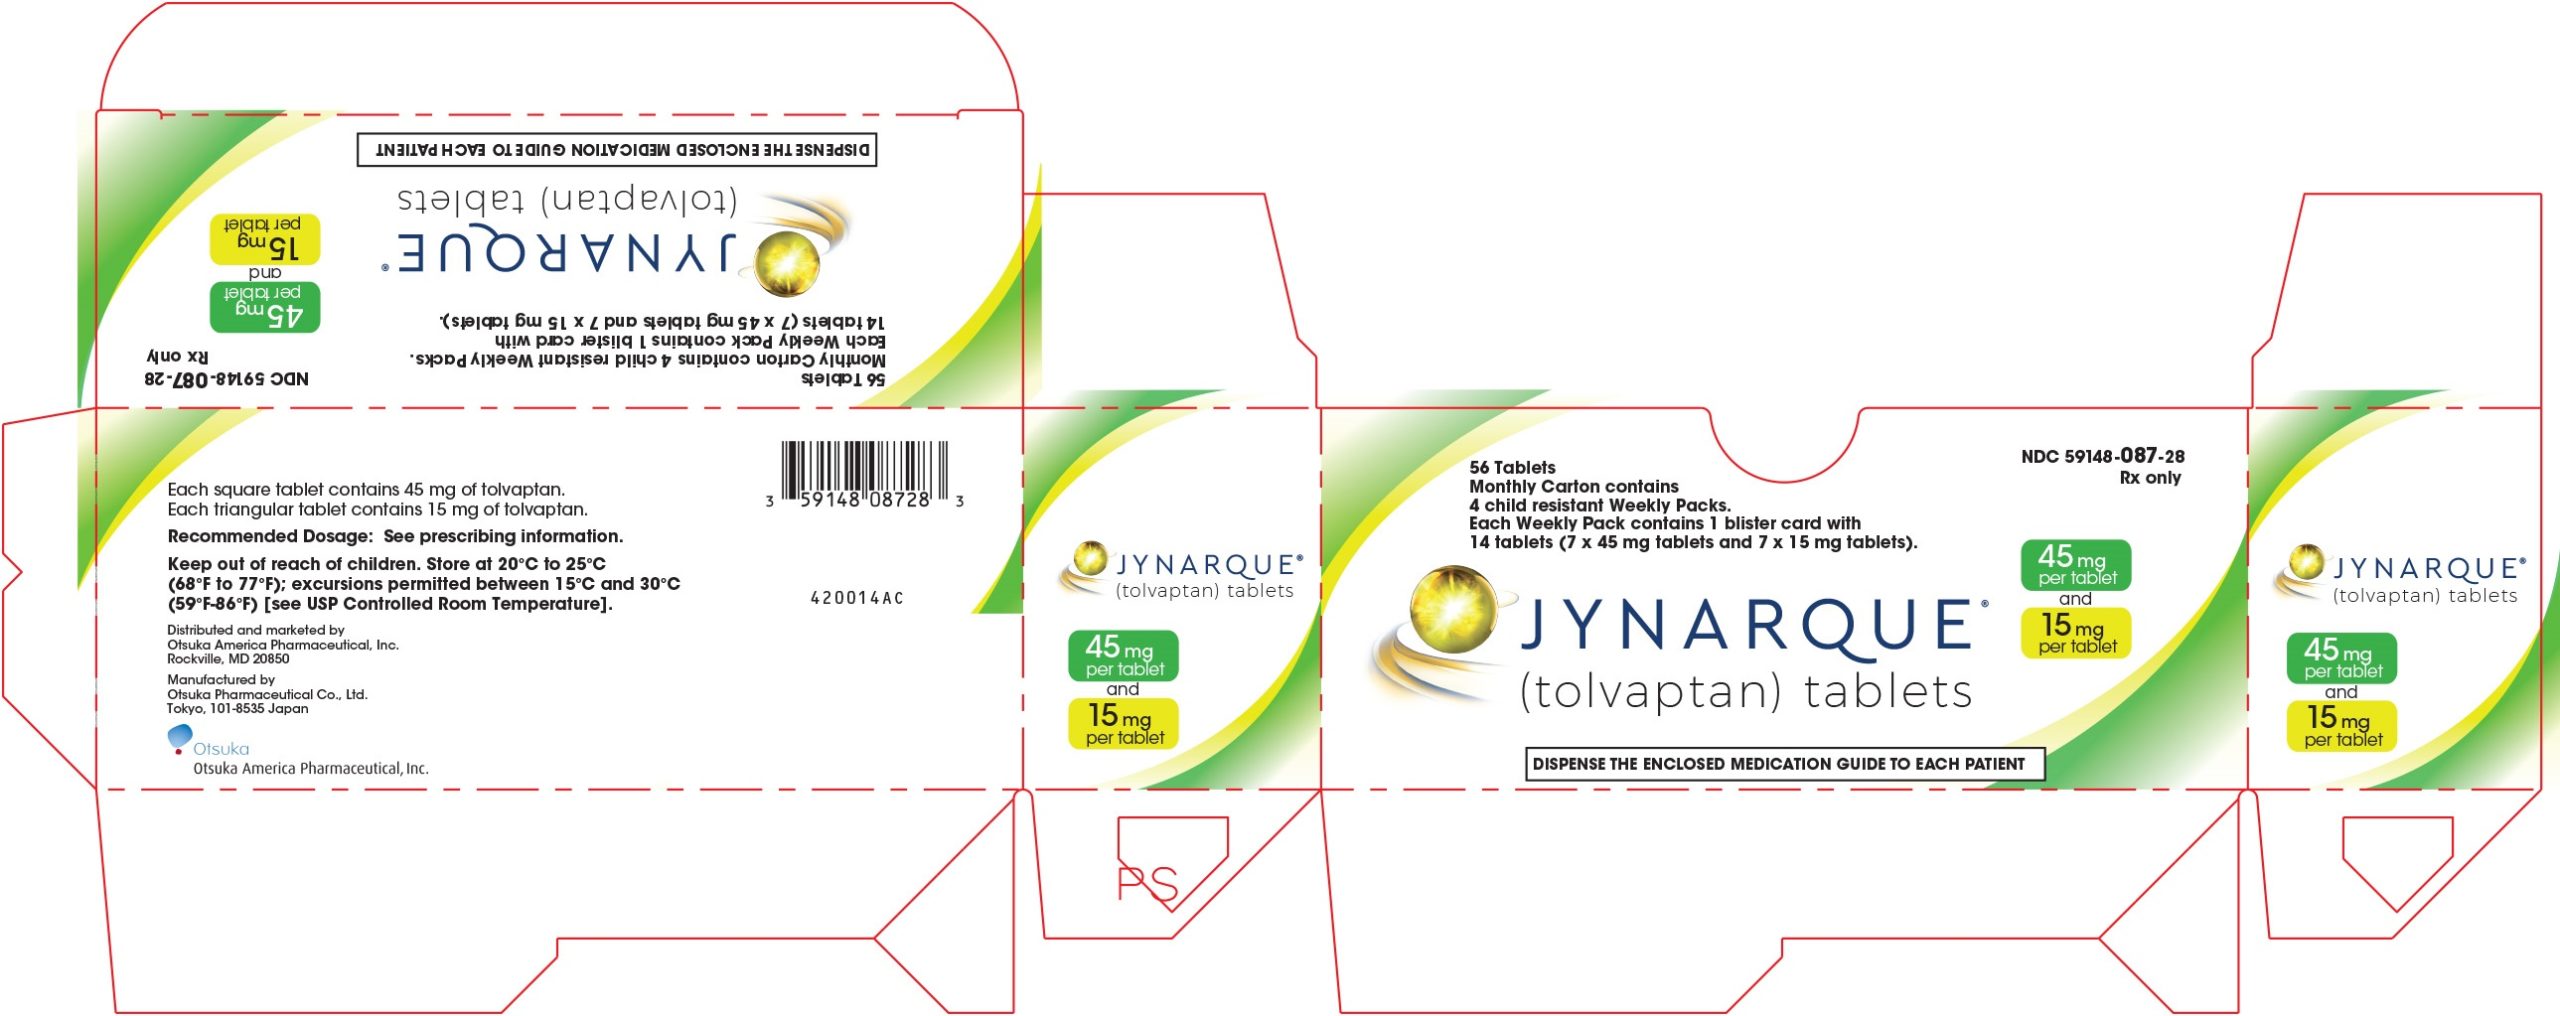 BUY Tolvaptan (Jynarque) 15 mg/1 from GNH India at the best price ...